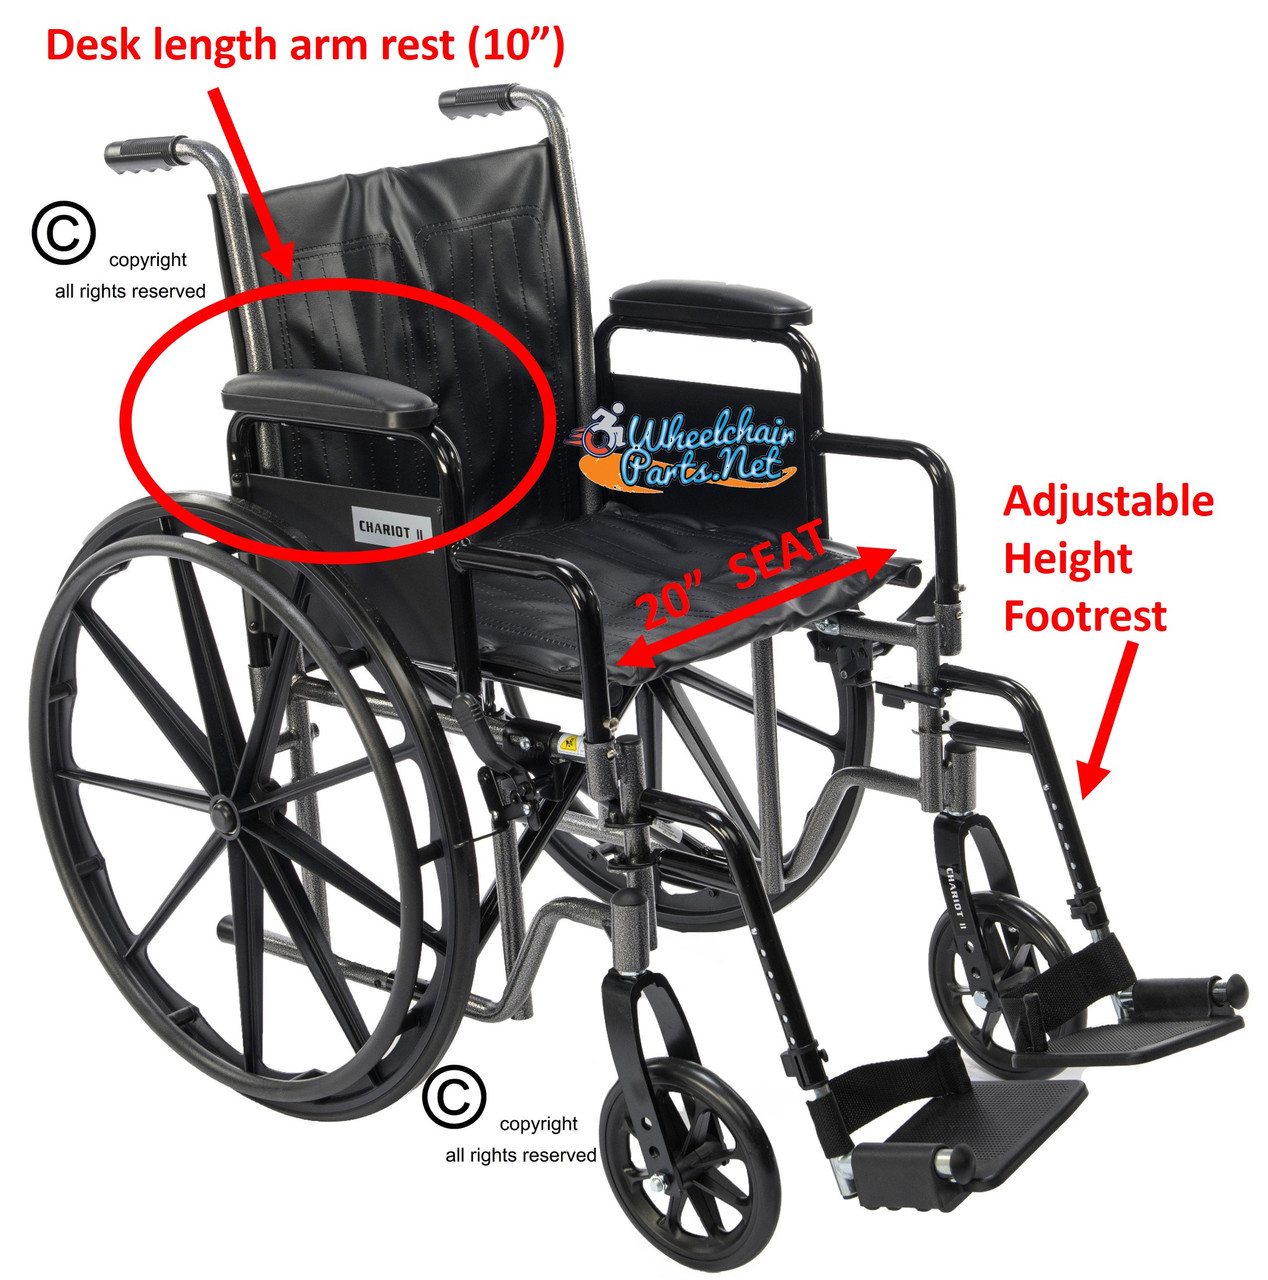 Proactive Medical Chariot II, Removable Arms & Swing Away Foot Rests